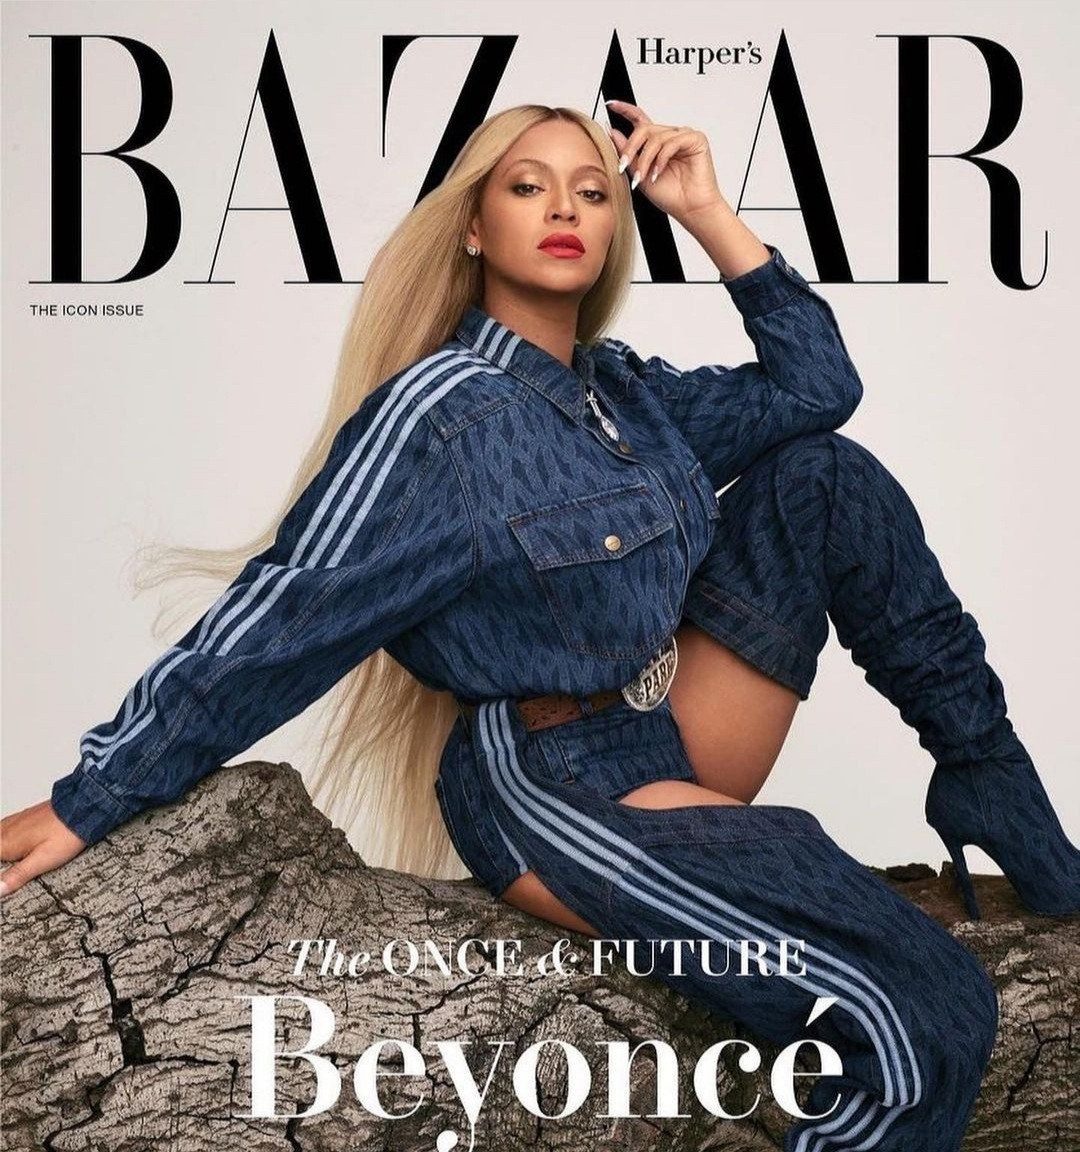 Beyonc? covers September issue of Harper